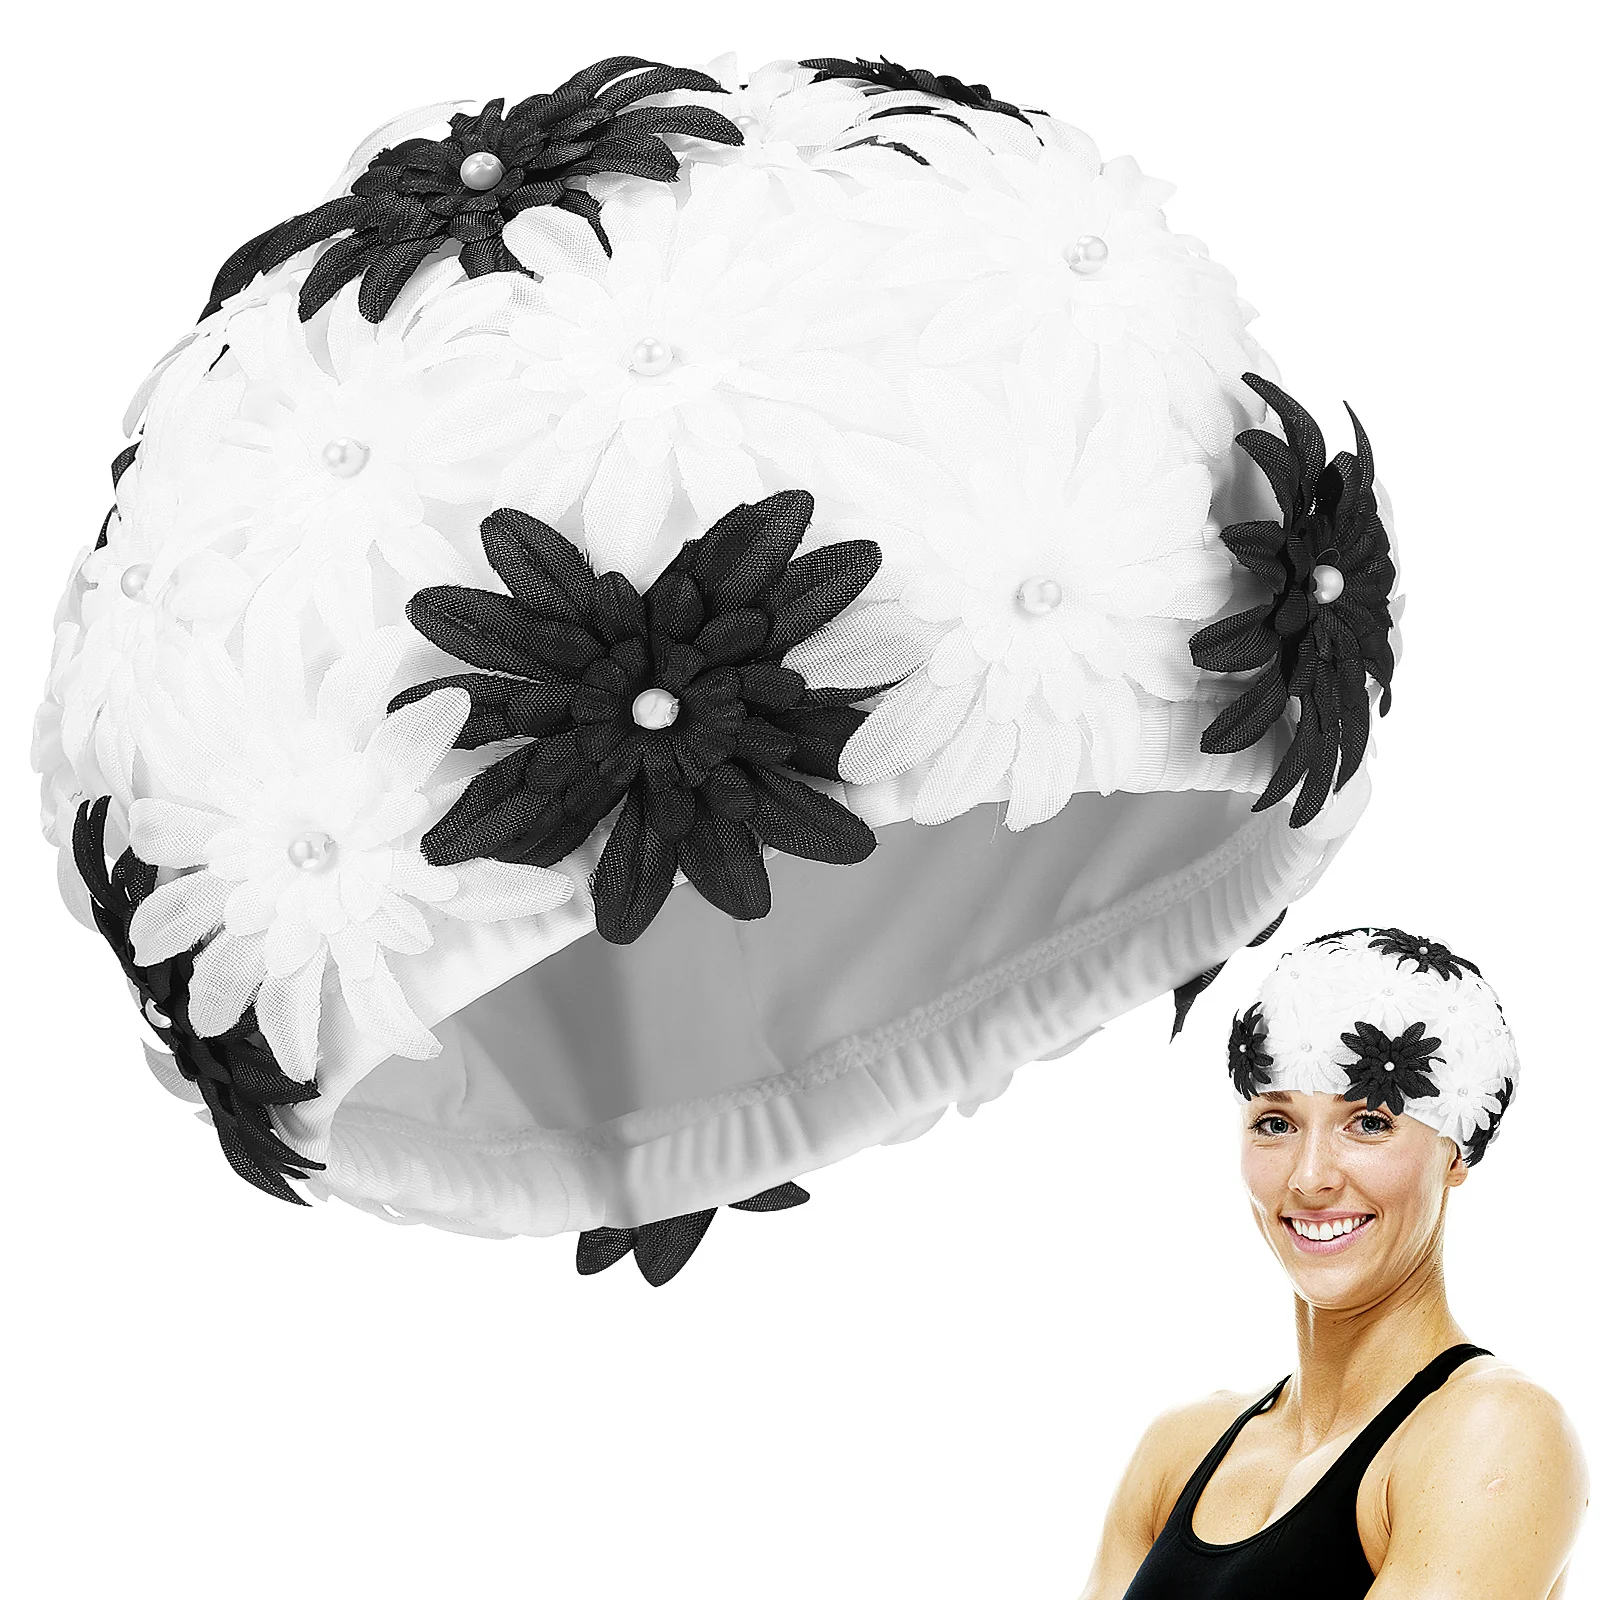 

Women Swim Caps For Girls Hollow Pearl Flower Swimming Hat Hand Stitched Swim Cap for Water Sports